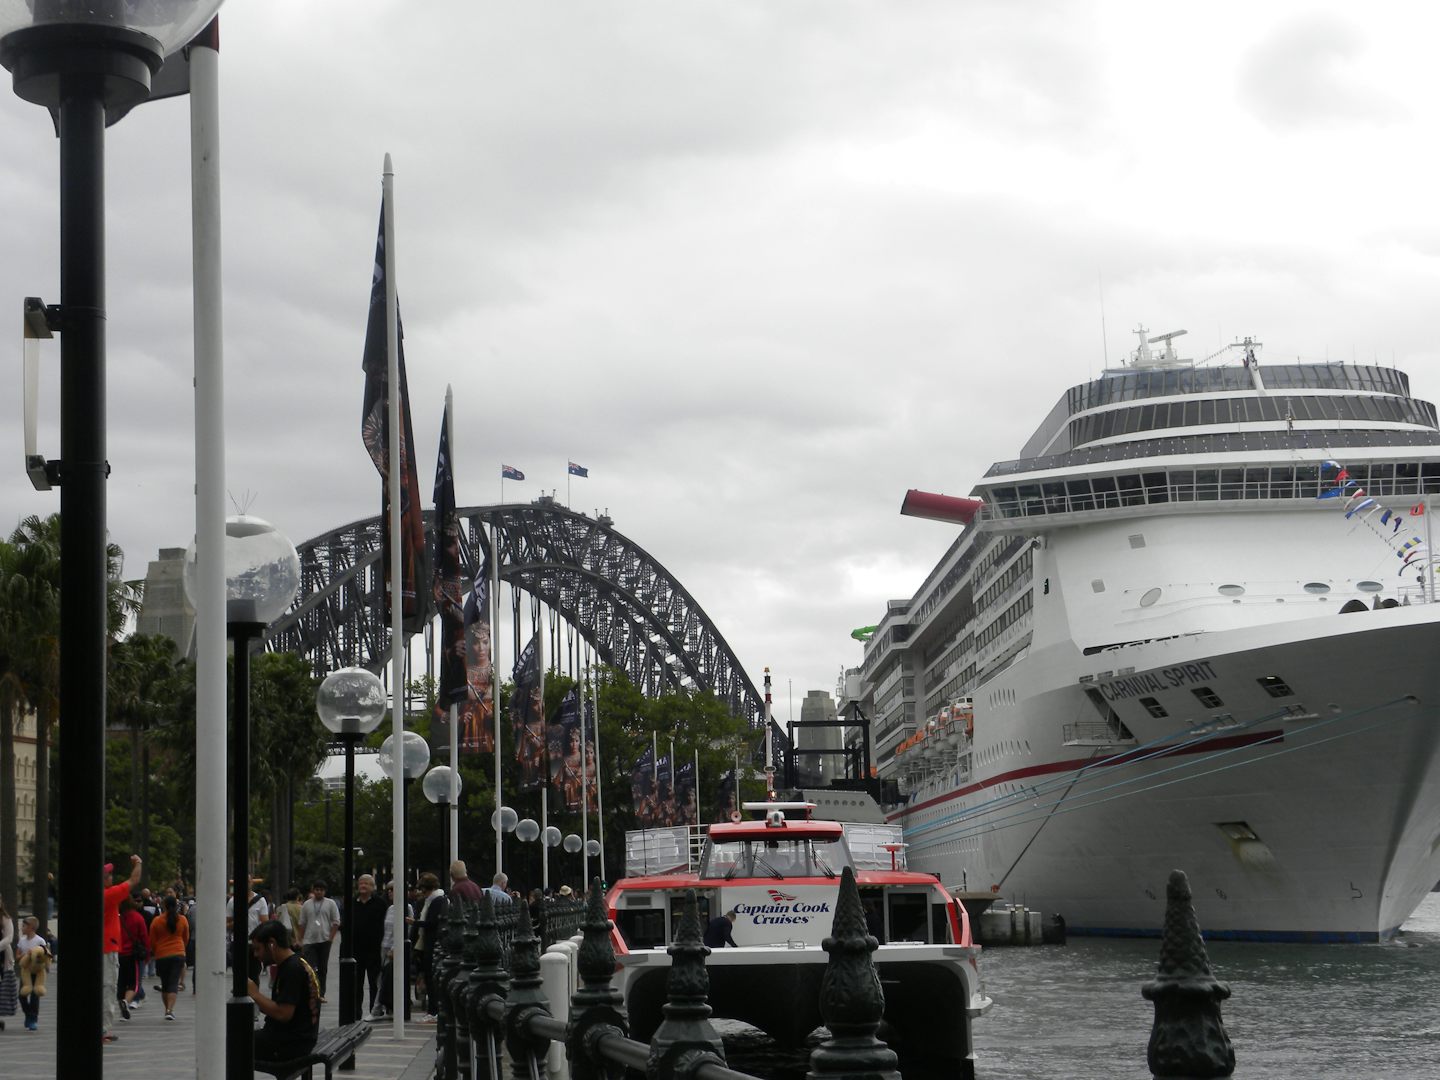 Carnival Spirit in Sydney ready to head to the South Pacific